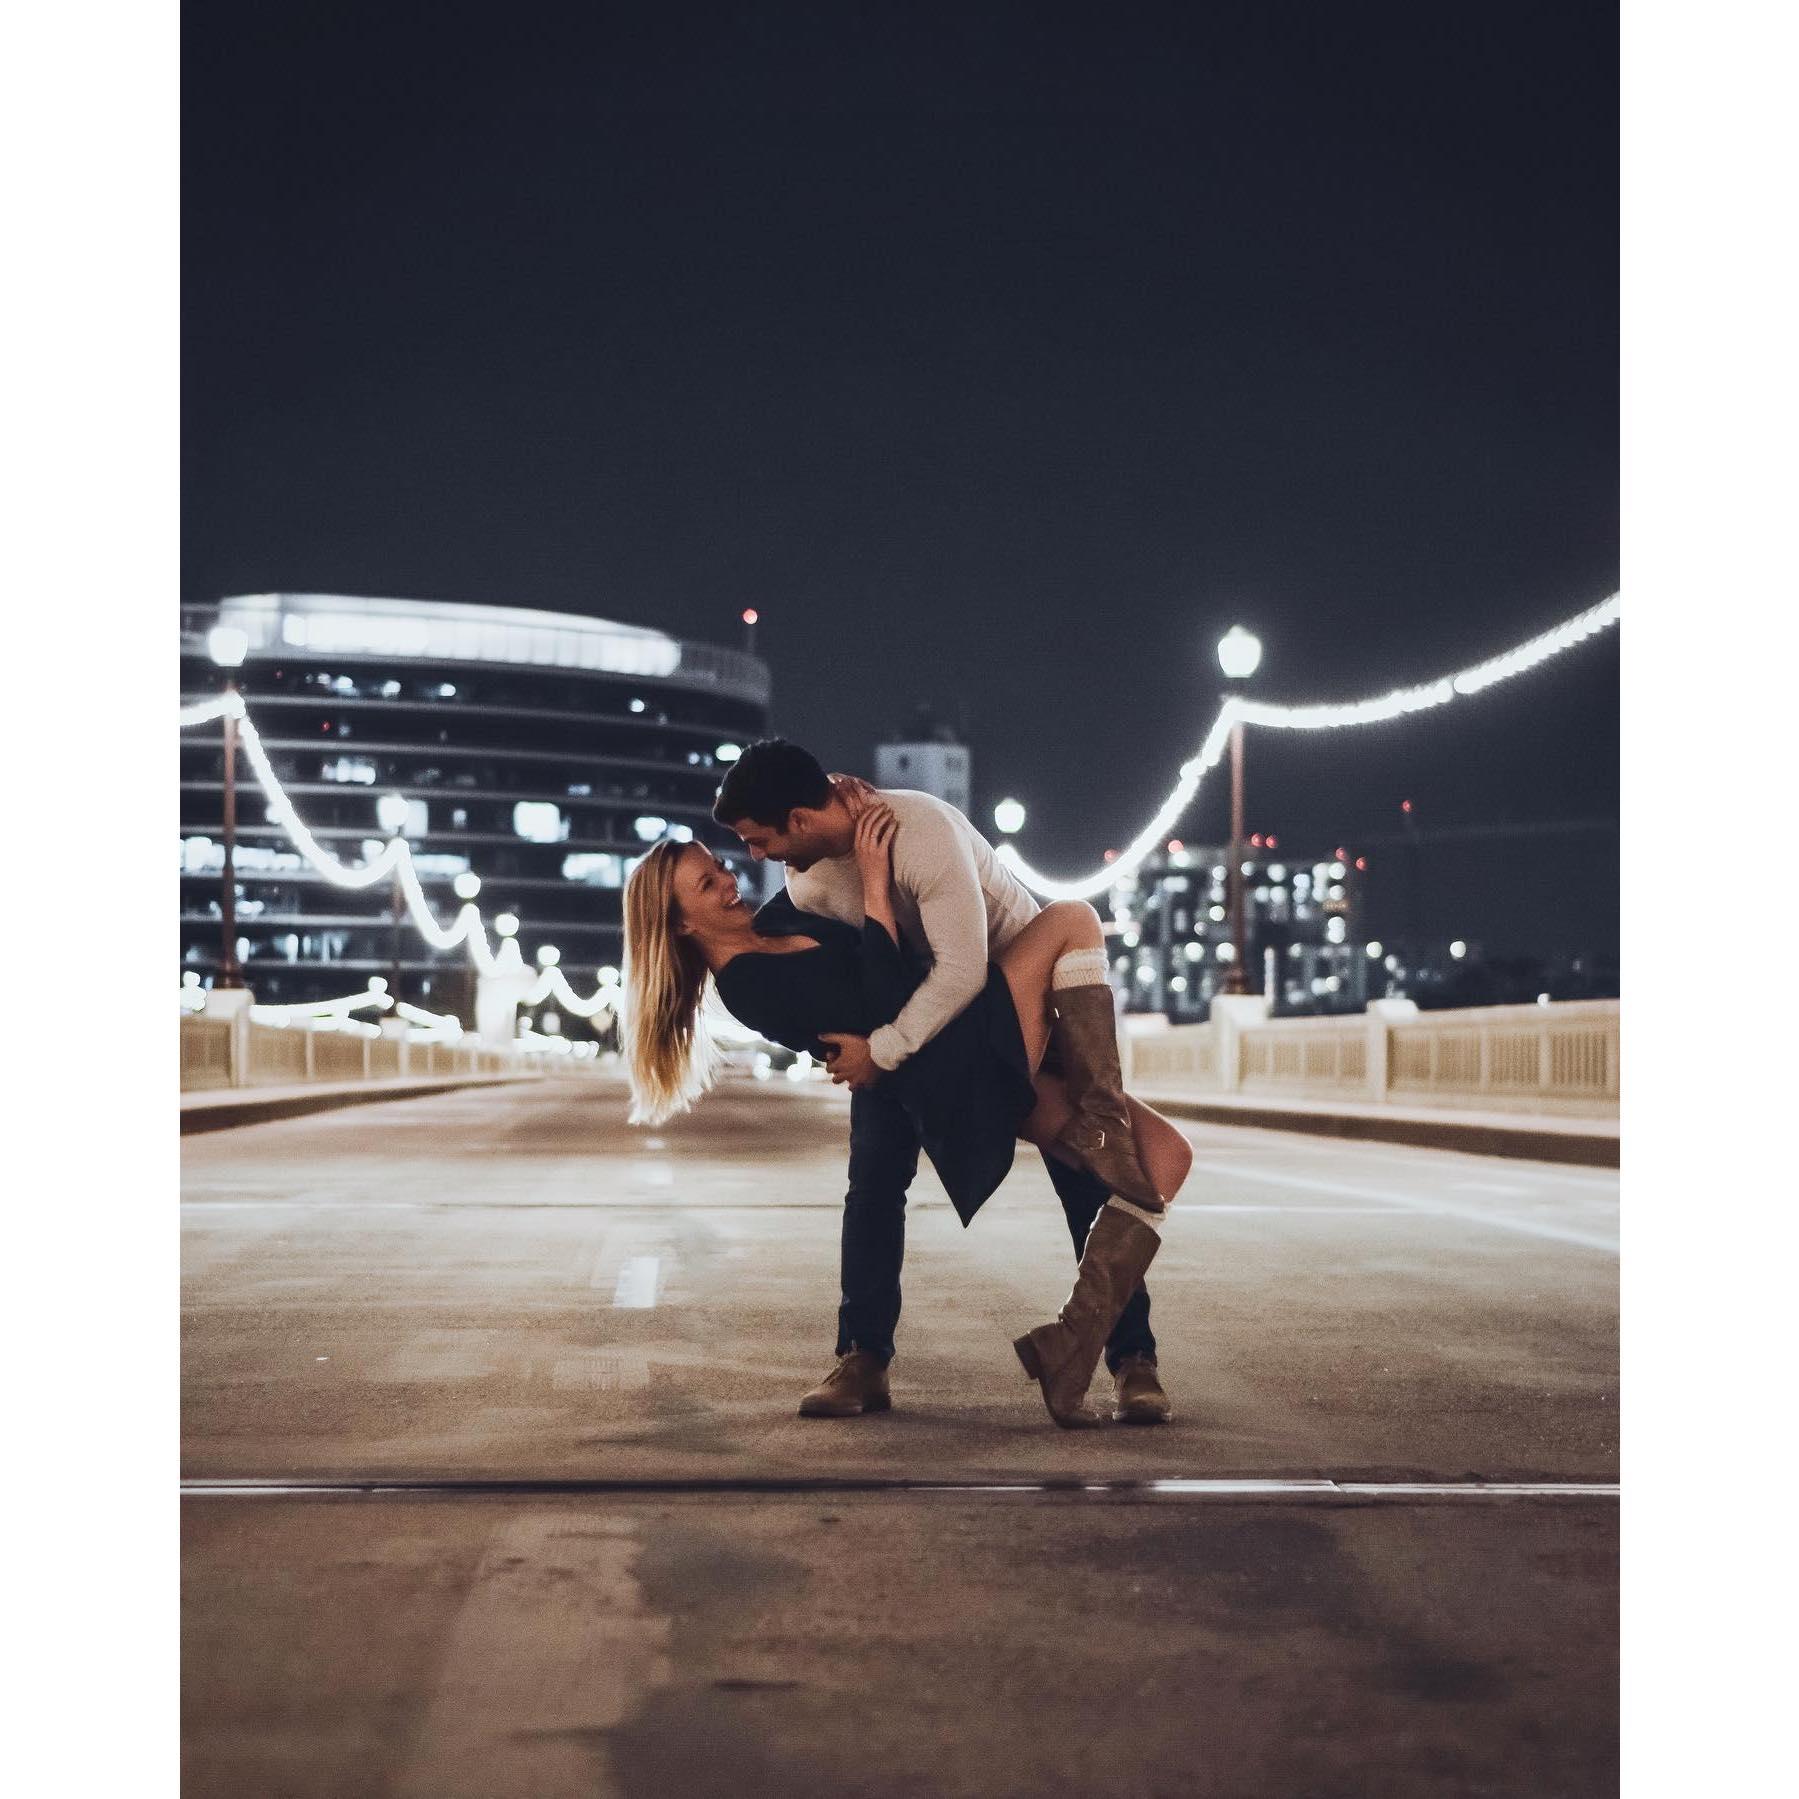 Dancing at Tempe Town Lake on November 19, 2018 (5 years before our wedding date)